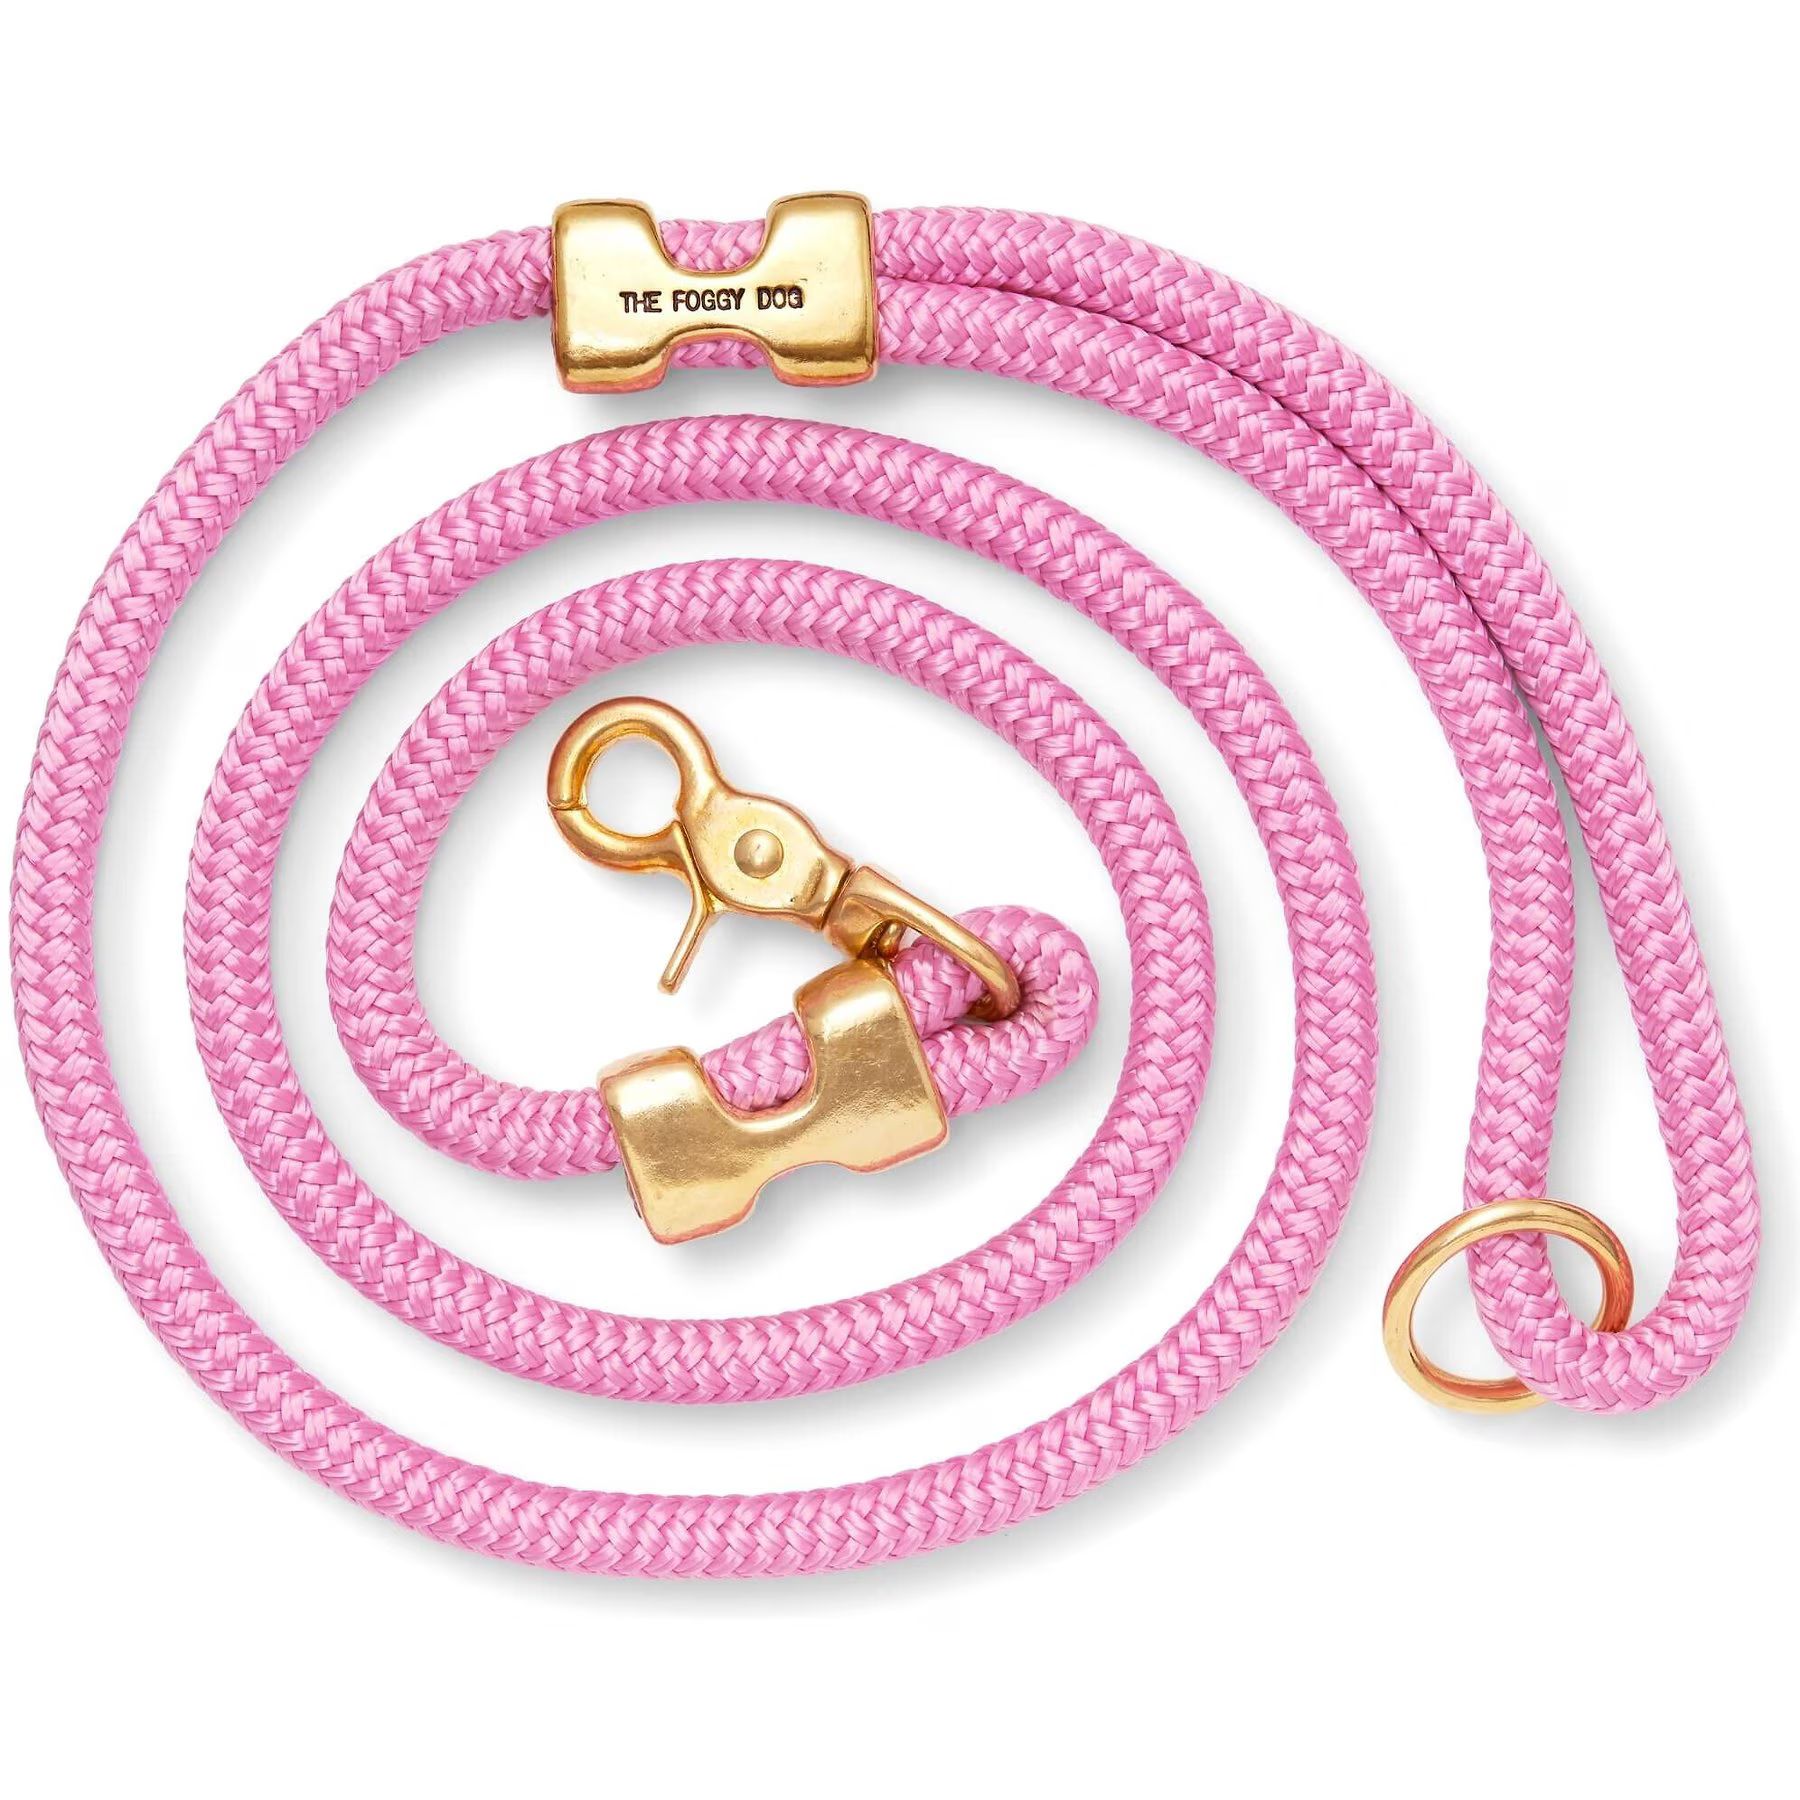 THE FOGGY DOG Orchid Marine Rope Dog Leash, 5-ft long, 3/8-in wide - Chewy.com | Chewy.com